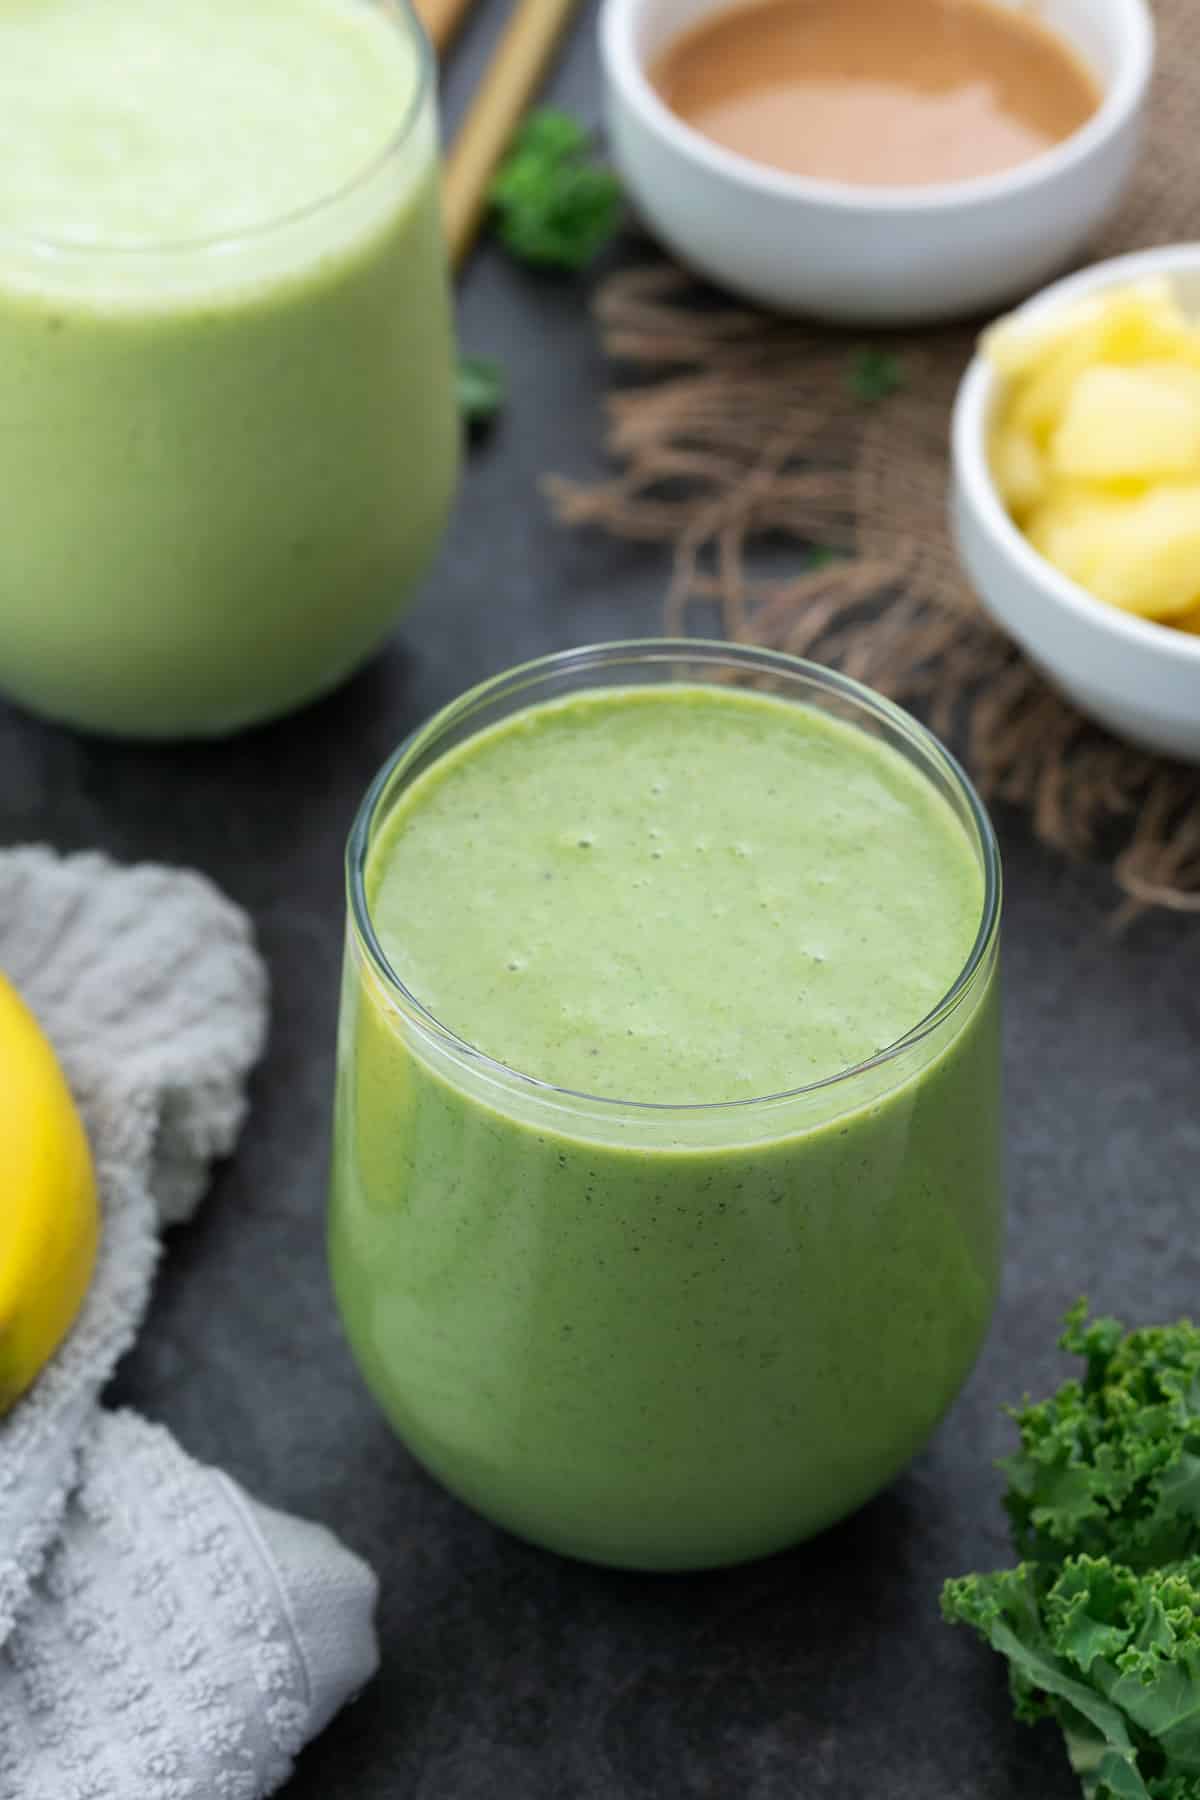 Kale Pineapple Smoothie served in a glass with pineapple and kale placed nearby.